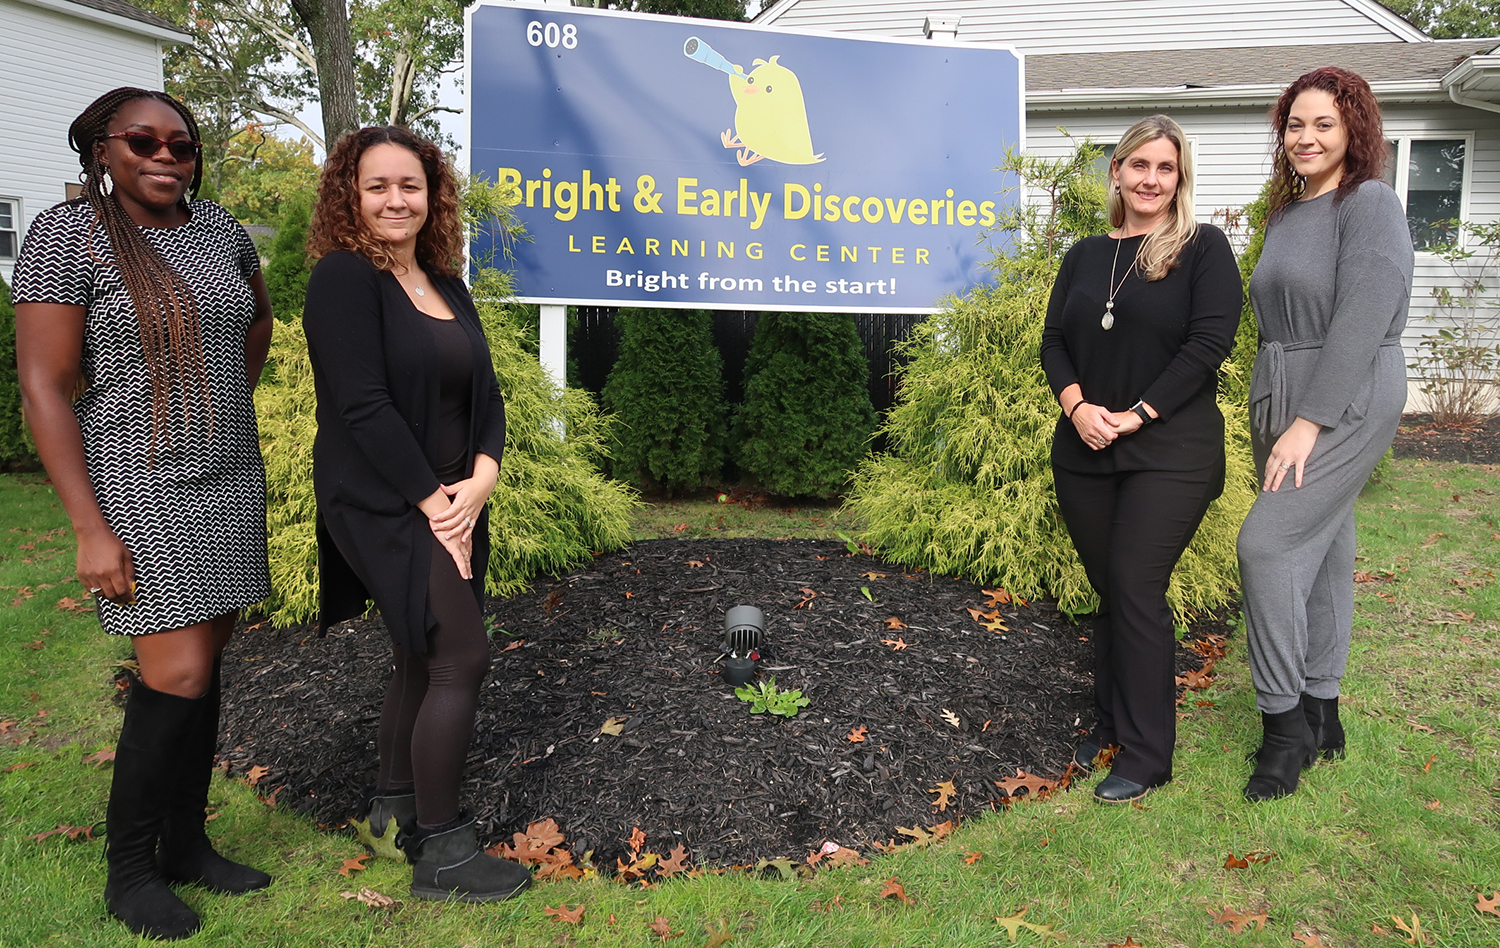 Bright & Early Discoveries plans eastward expansion to Cutchogue